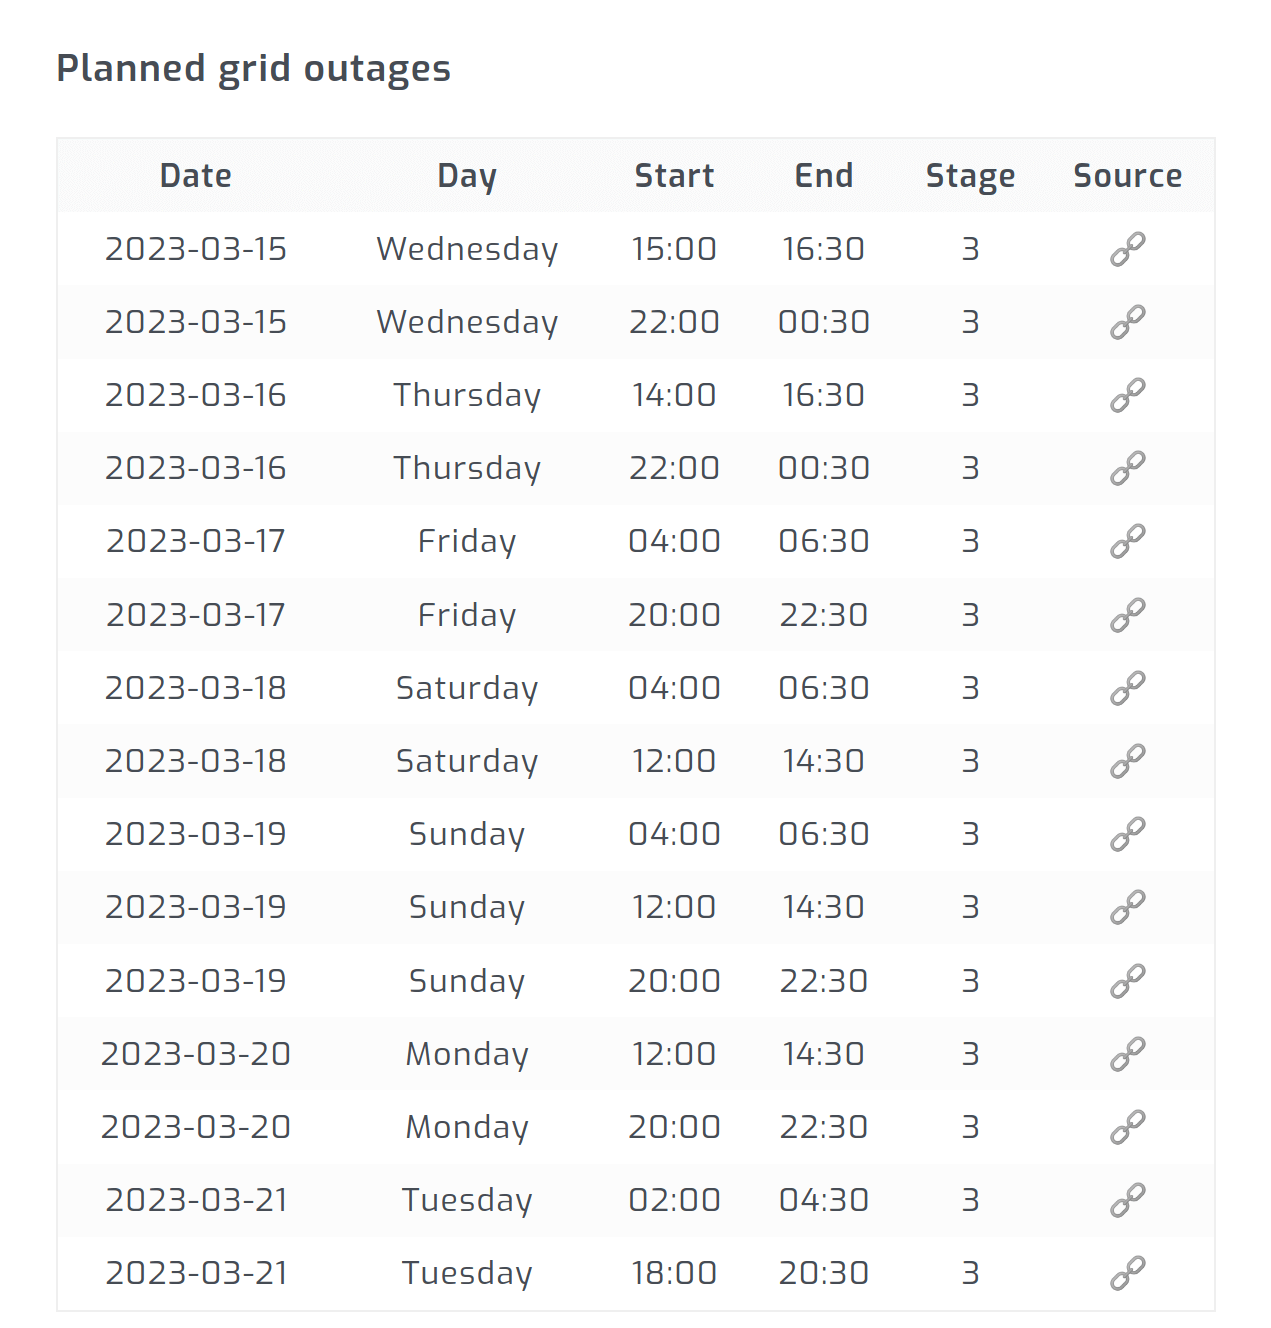 Planned grid outages